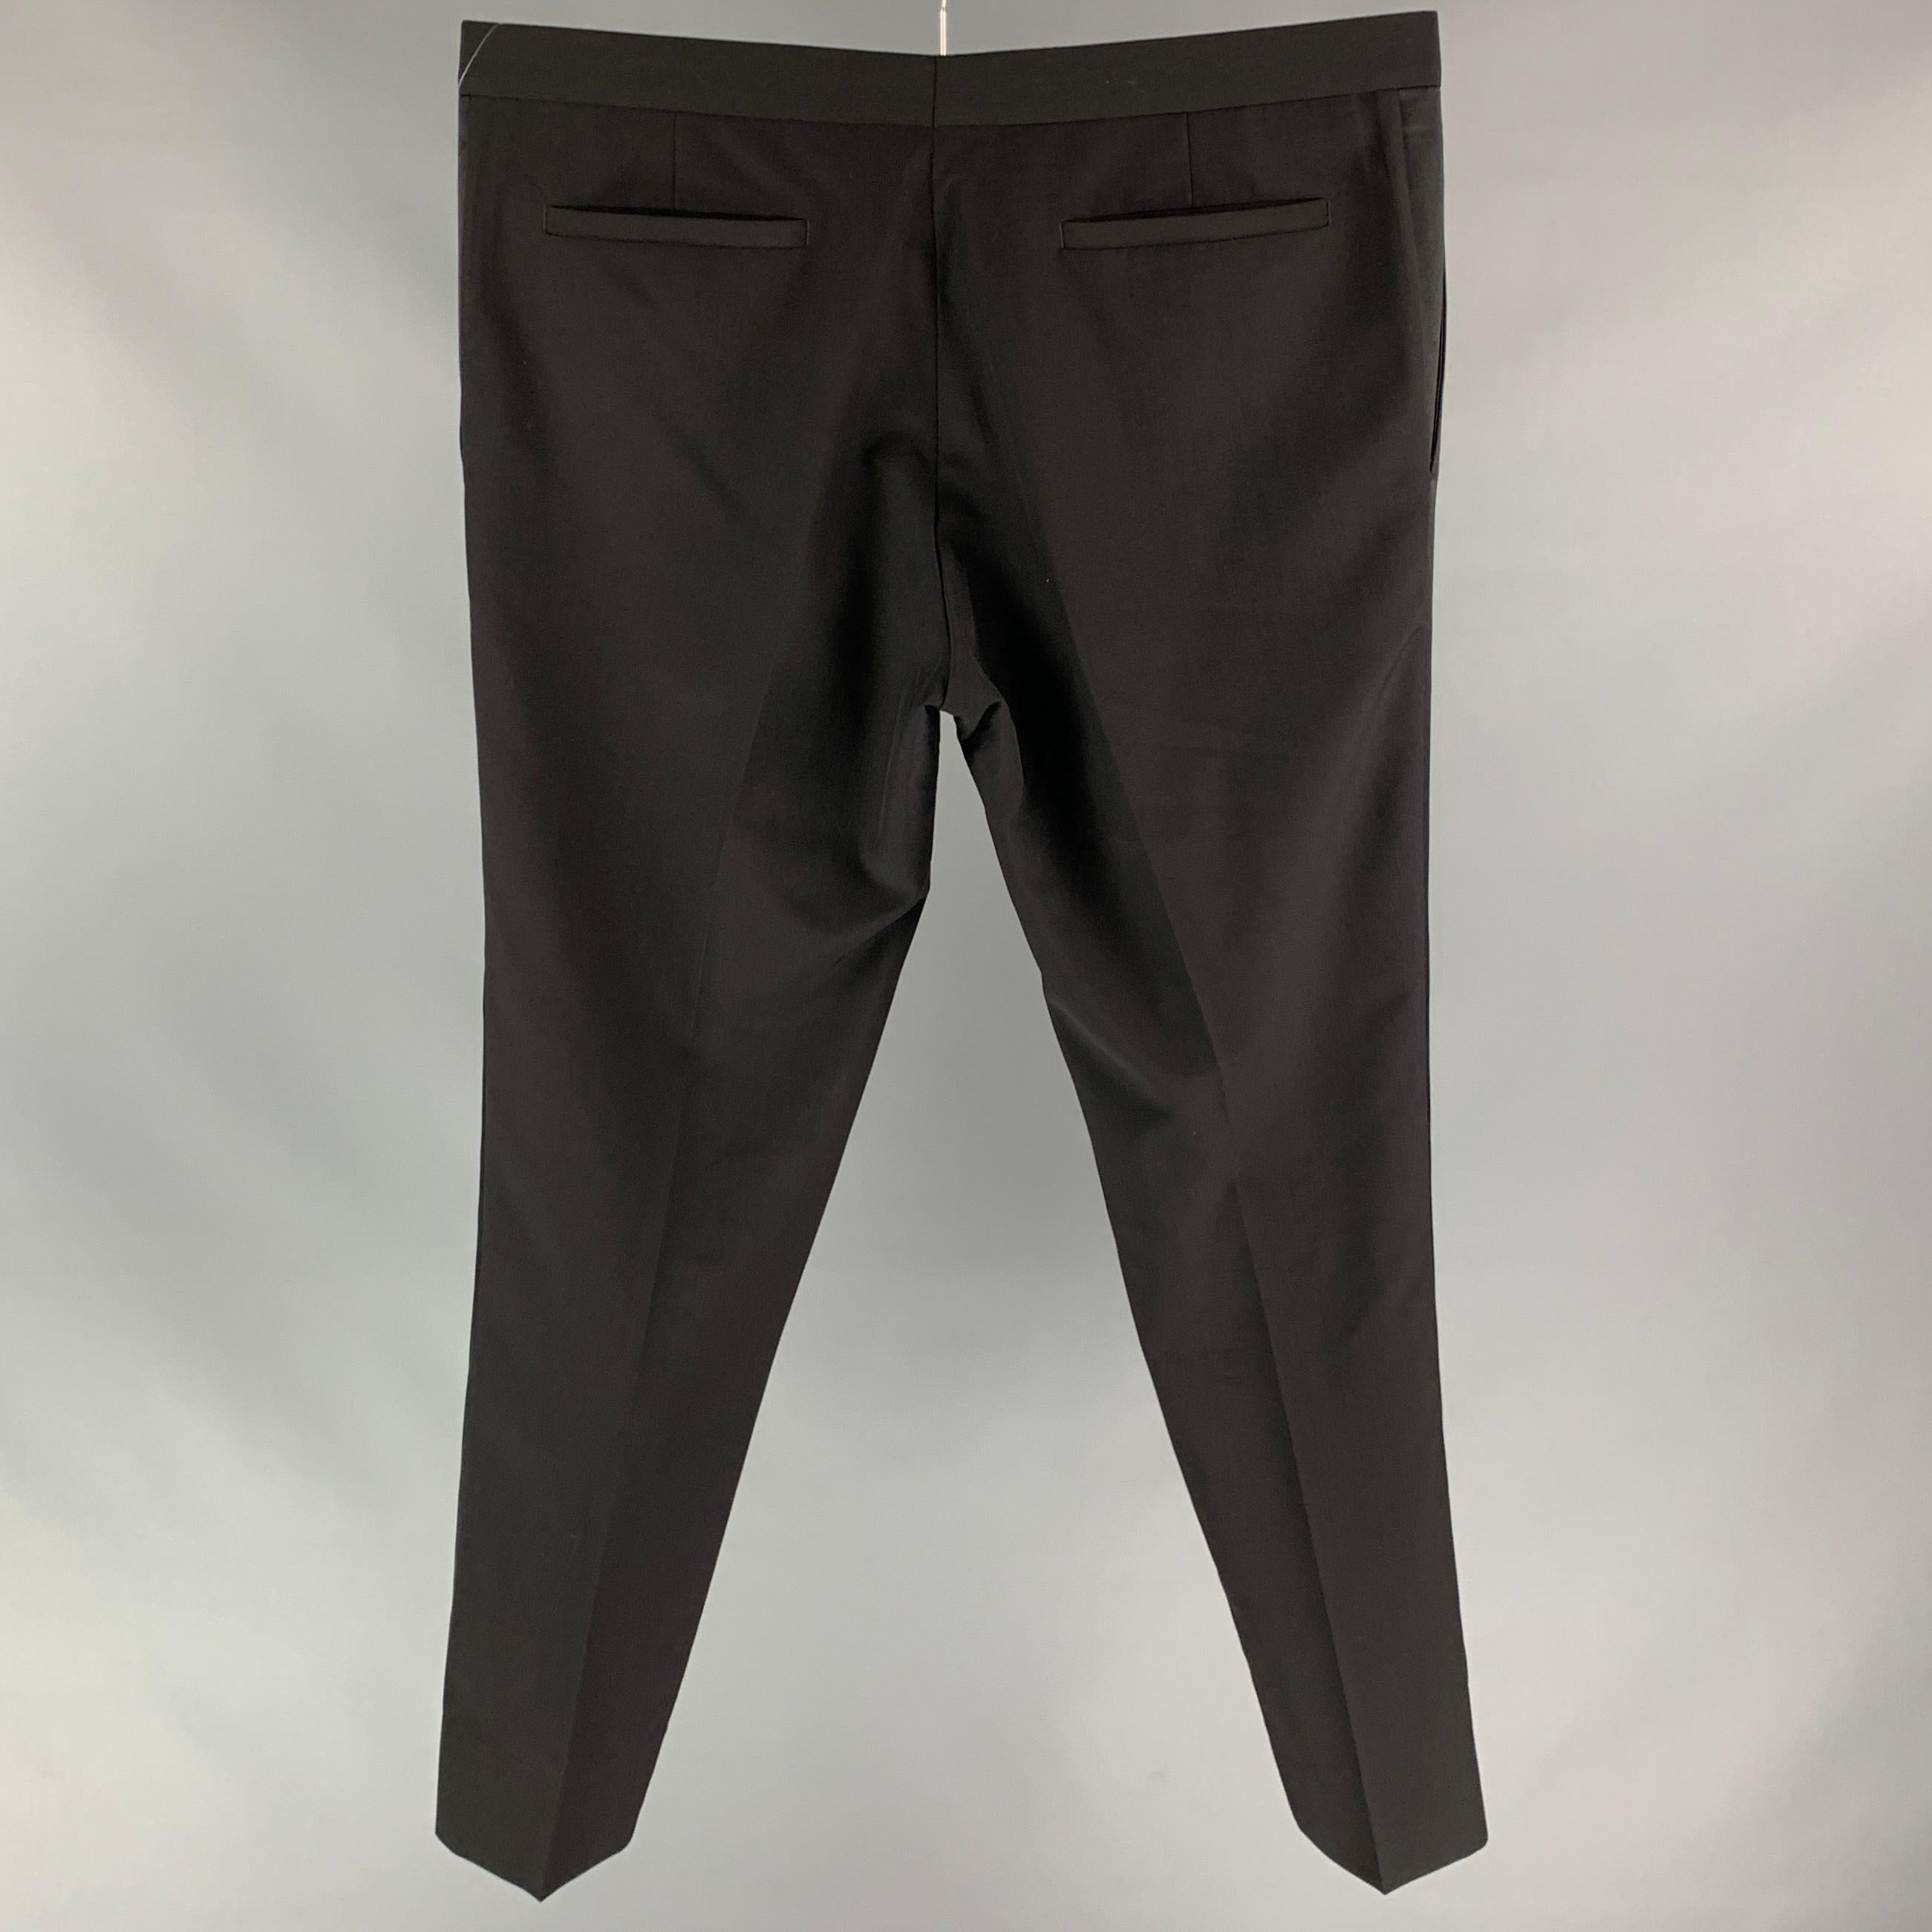 DIOR HOMME tuxedo dress pants comes in a black wool / mohair featuring a flat front, front tab, and a zip fly closure. Made in Italy.

Very Good Pre-Owned Condition.
Marked: 52

Measurements:

Waist: 36 in.
Rise: 10 in.
Inseam: 31 in. 

SKU: